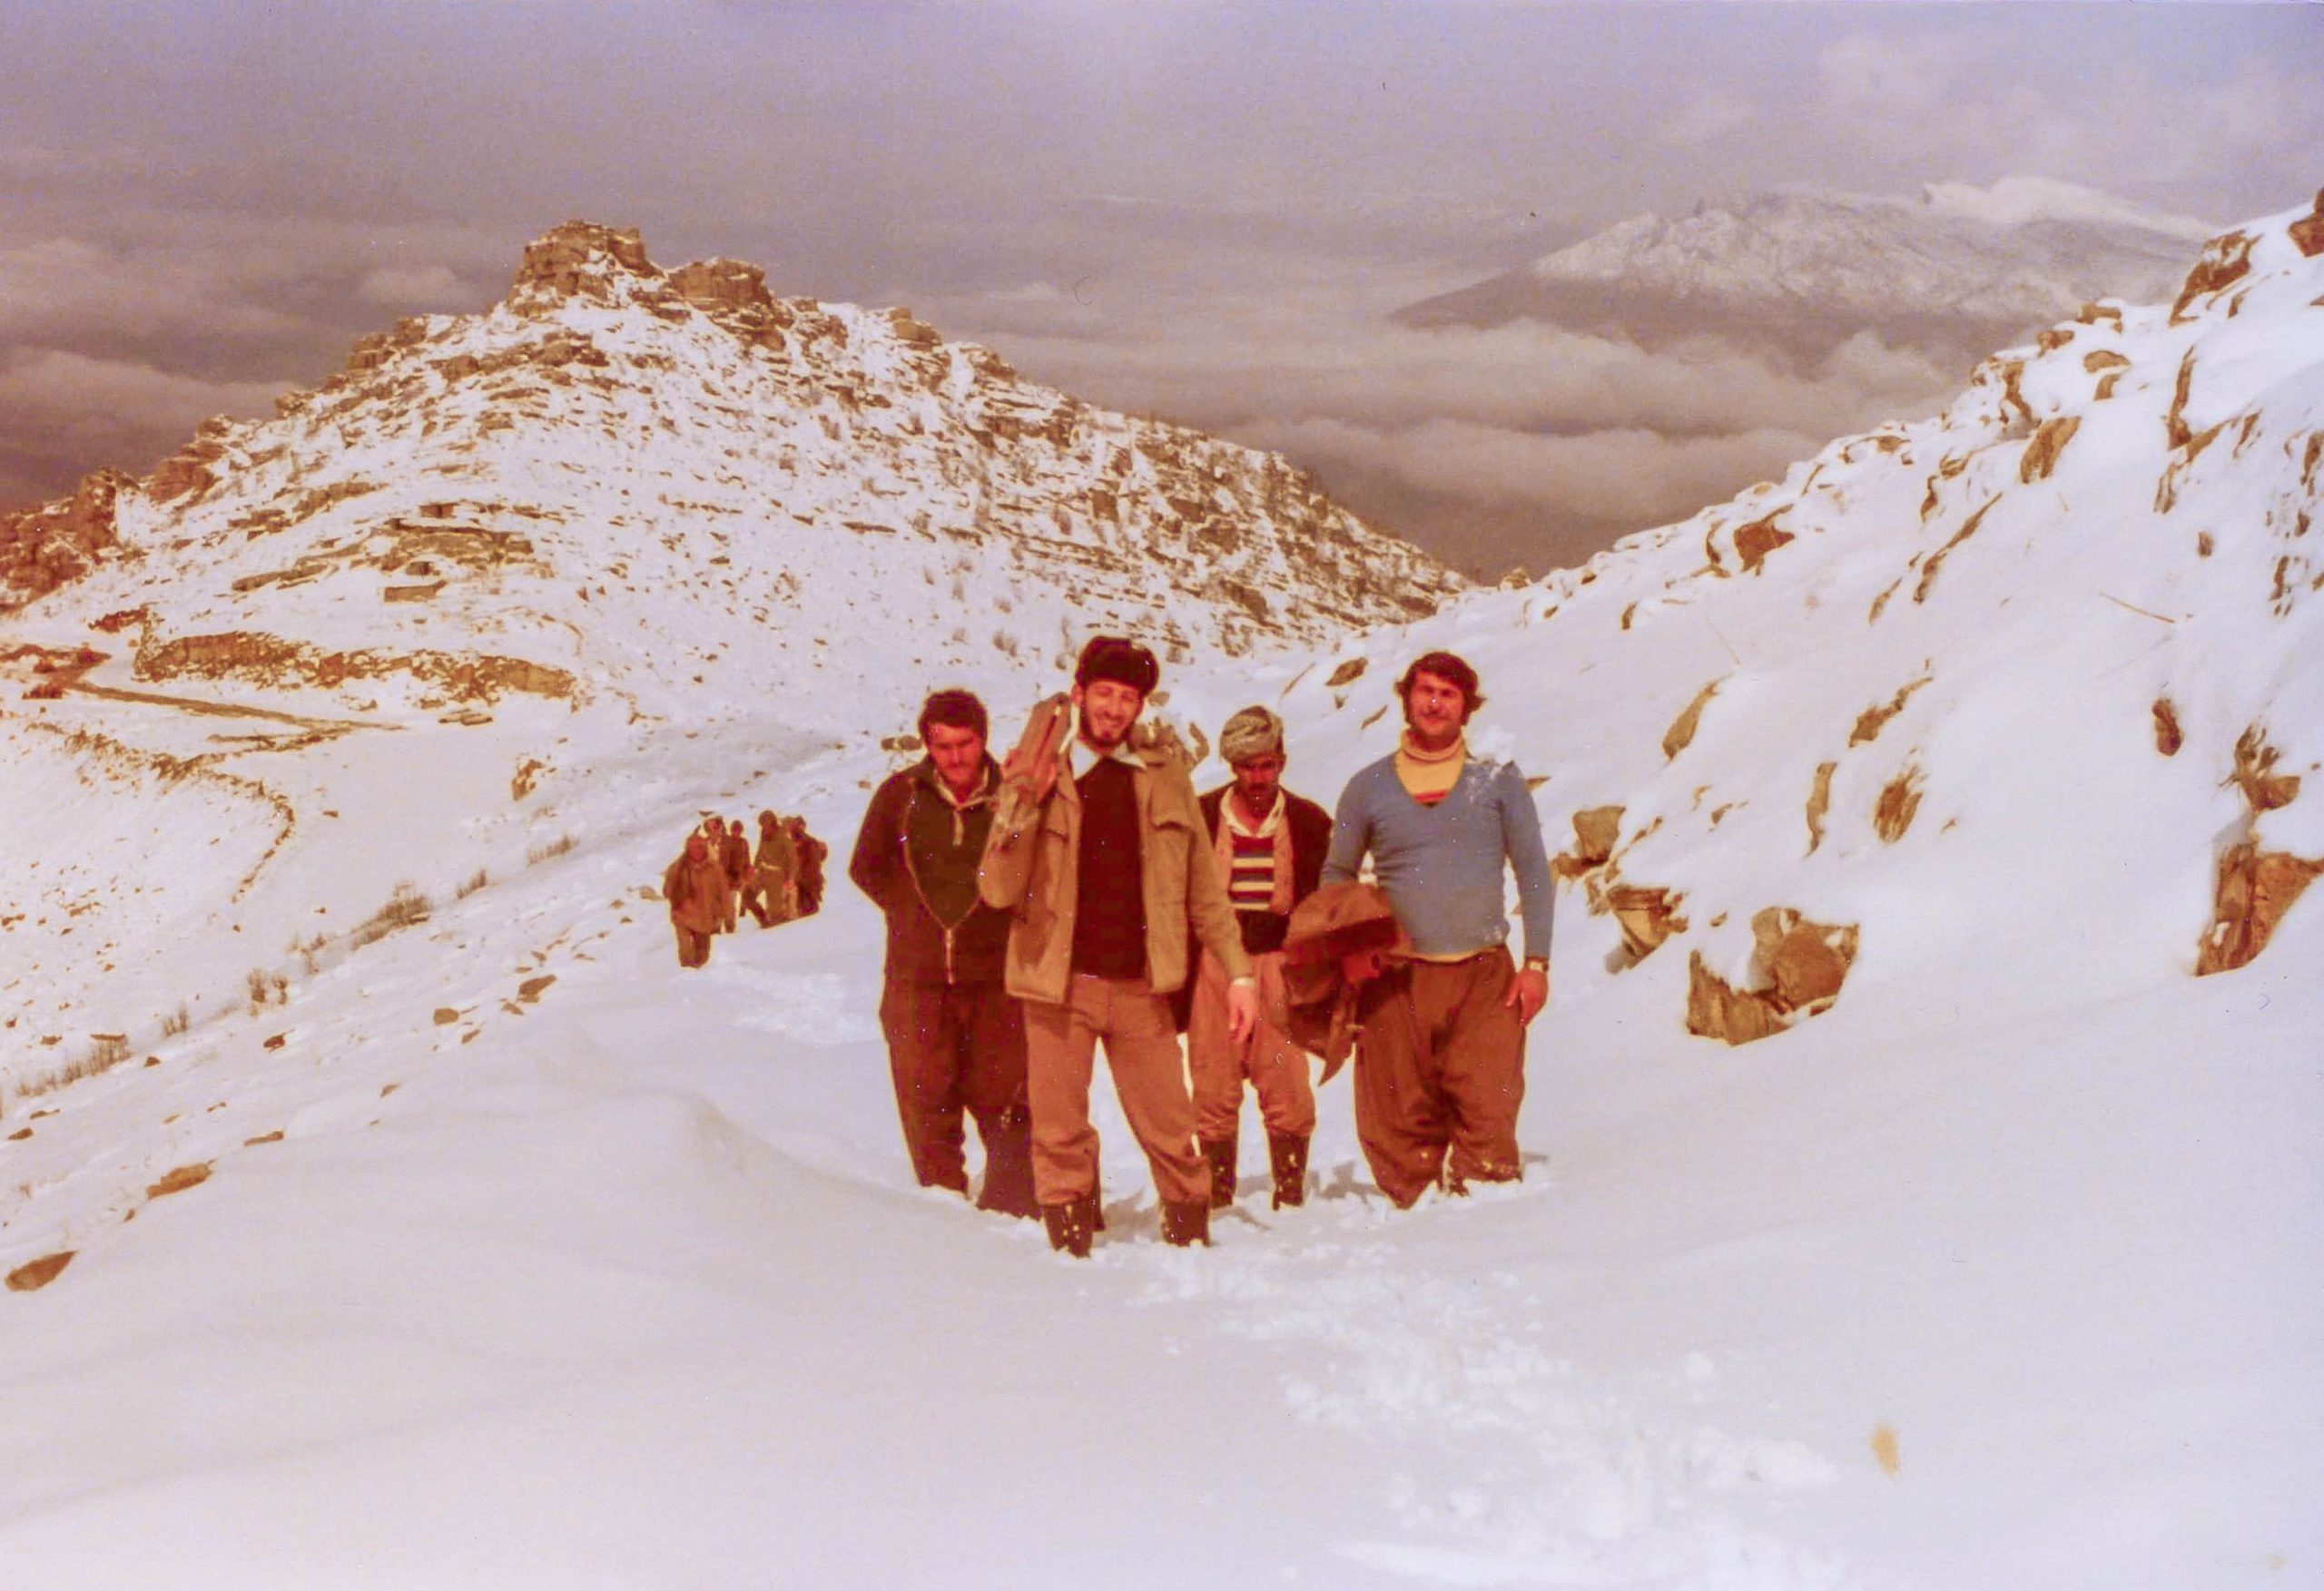 A small group of people, including Mazin Younis, pose for the camera as they ascend the snowy slopes of Mount Korek